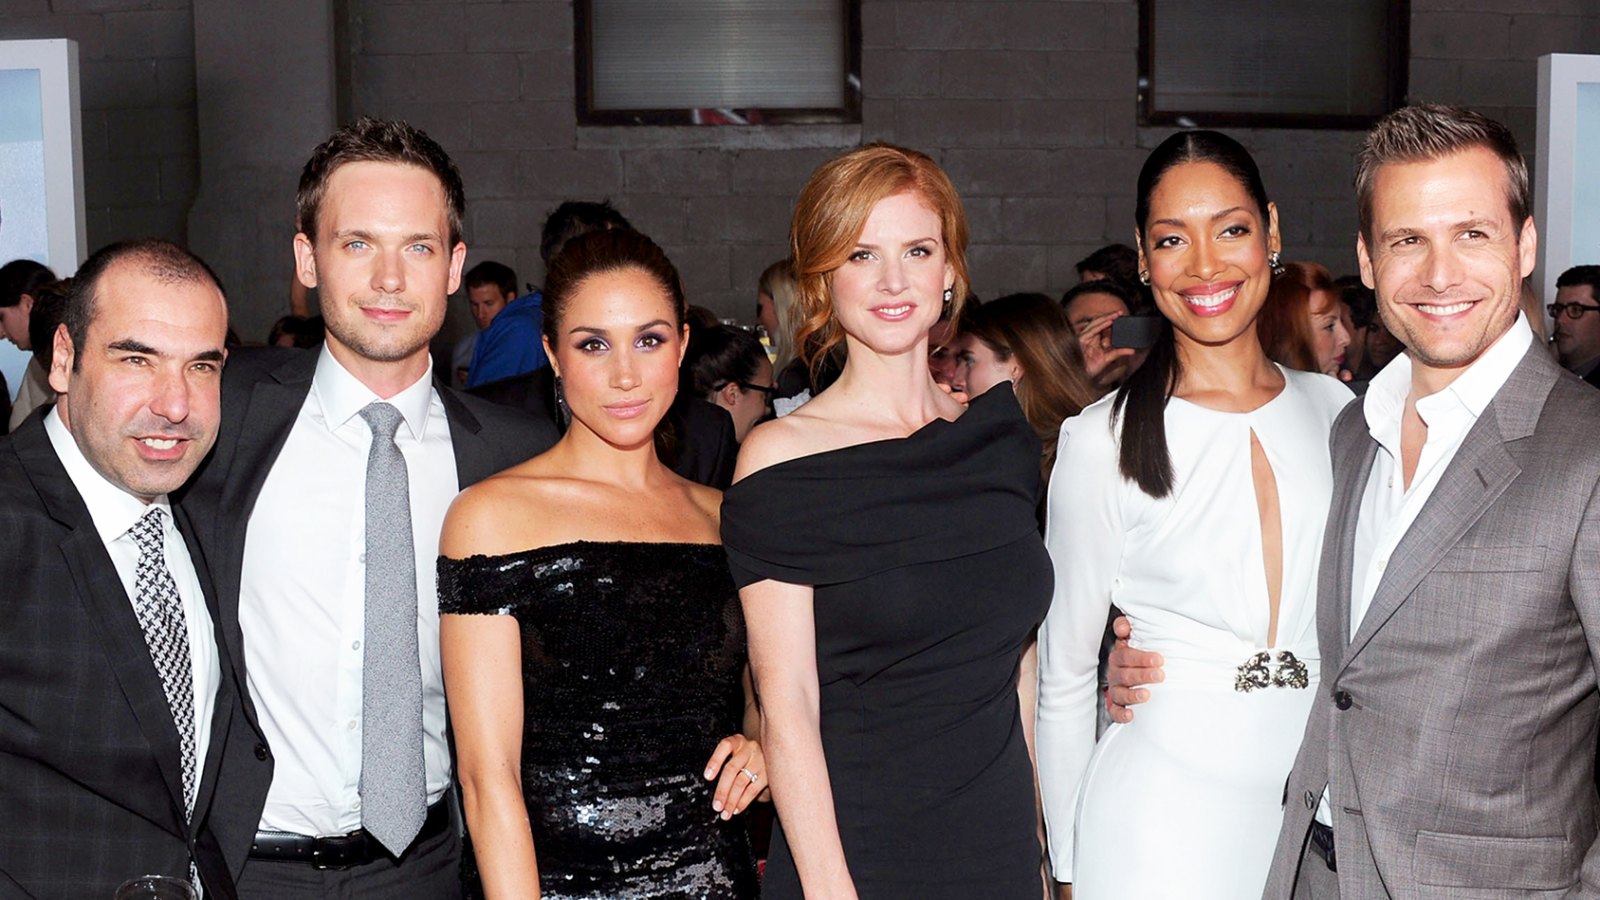 Rick Hoffman, Patrick J. Adams, Meghan Markle, Sarah Rafferty, Gina Torres and Gabriel Macht of Suits attend 2012 USA Network and Mr Porter.com Present "A Suits Story" in New York City.